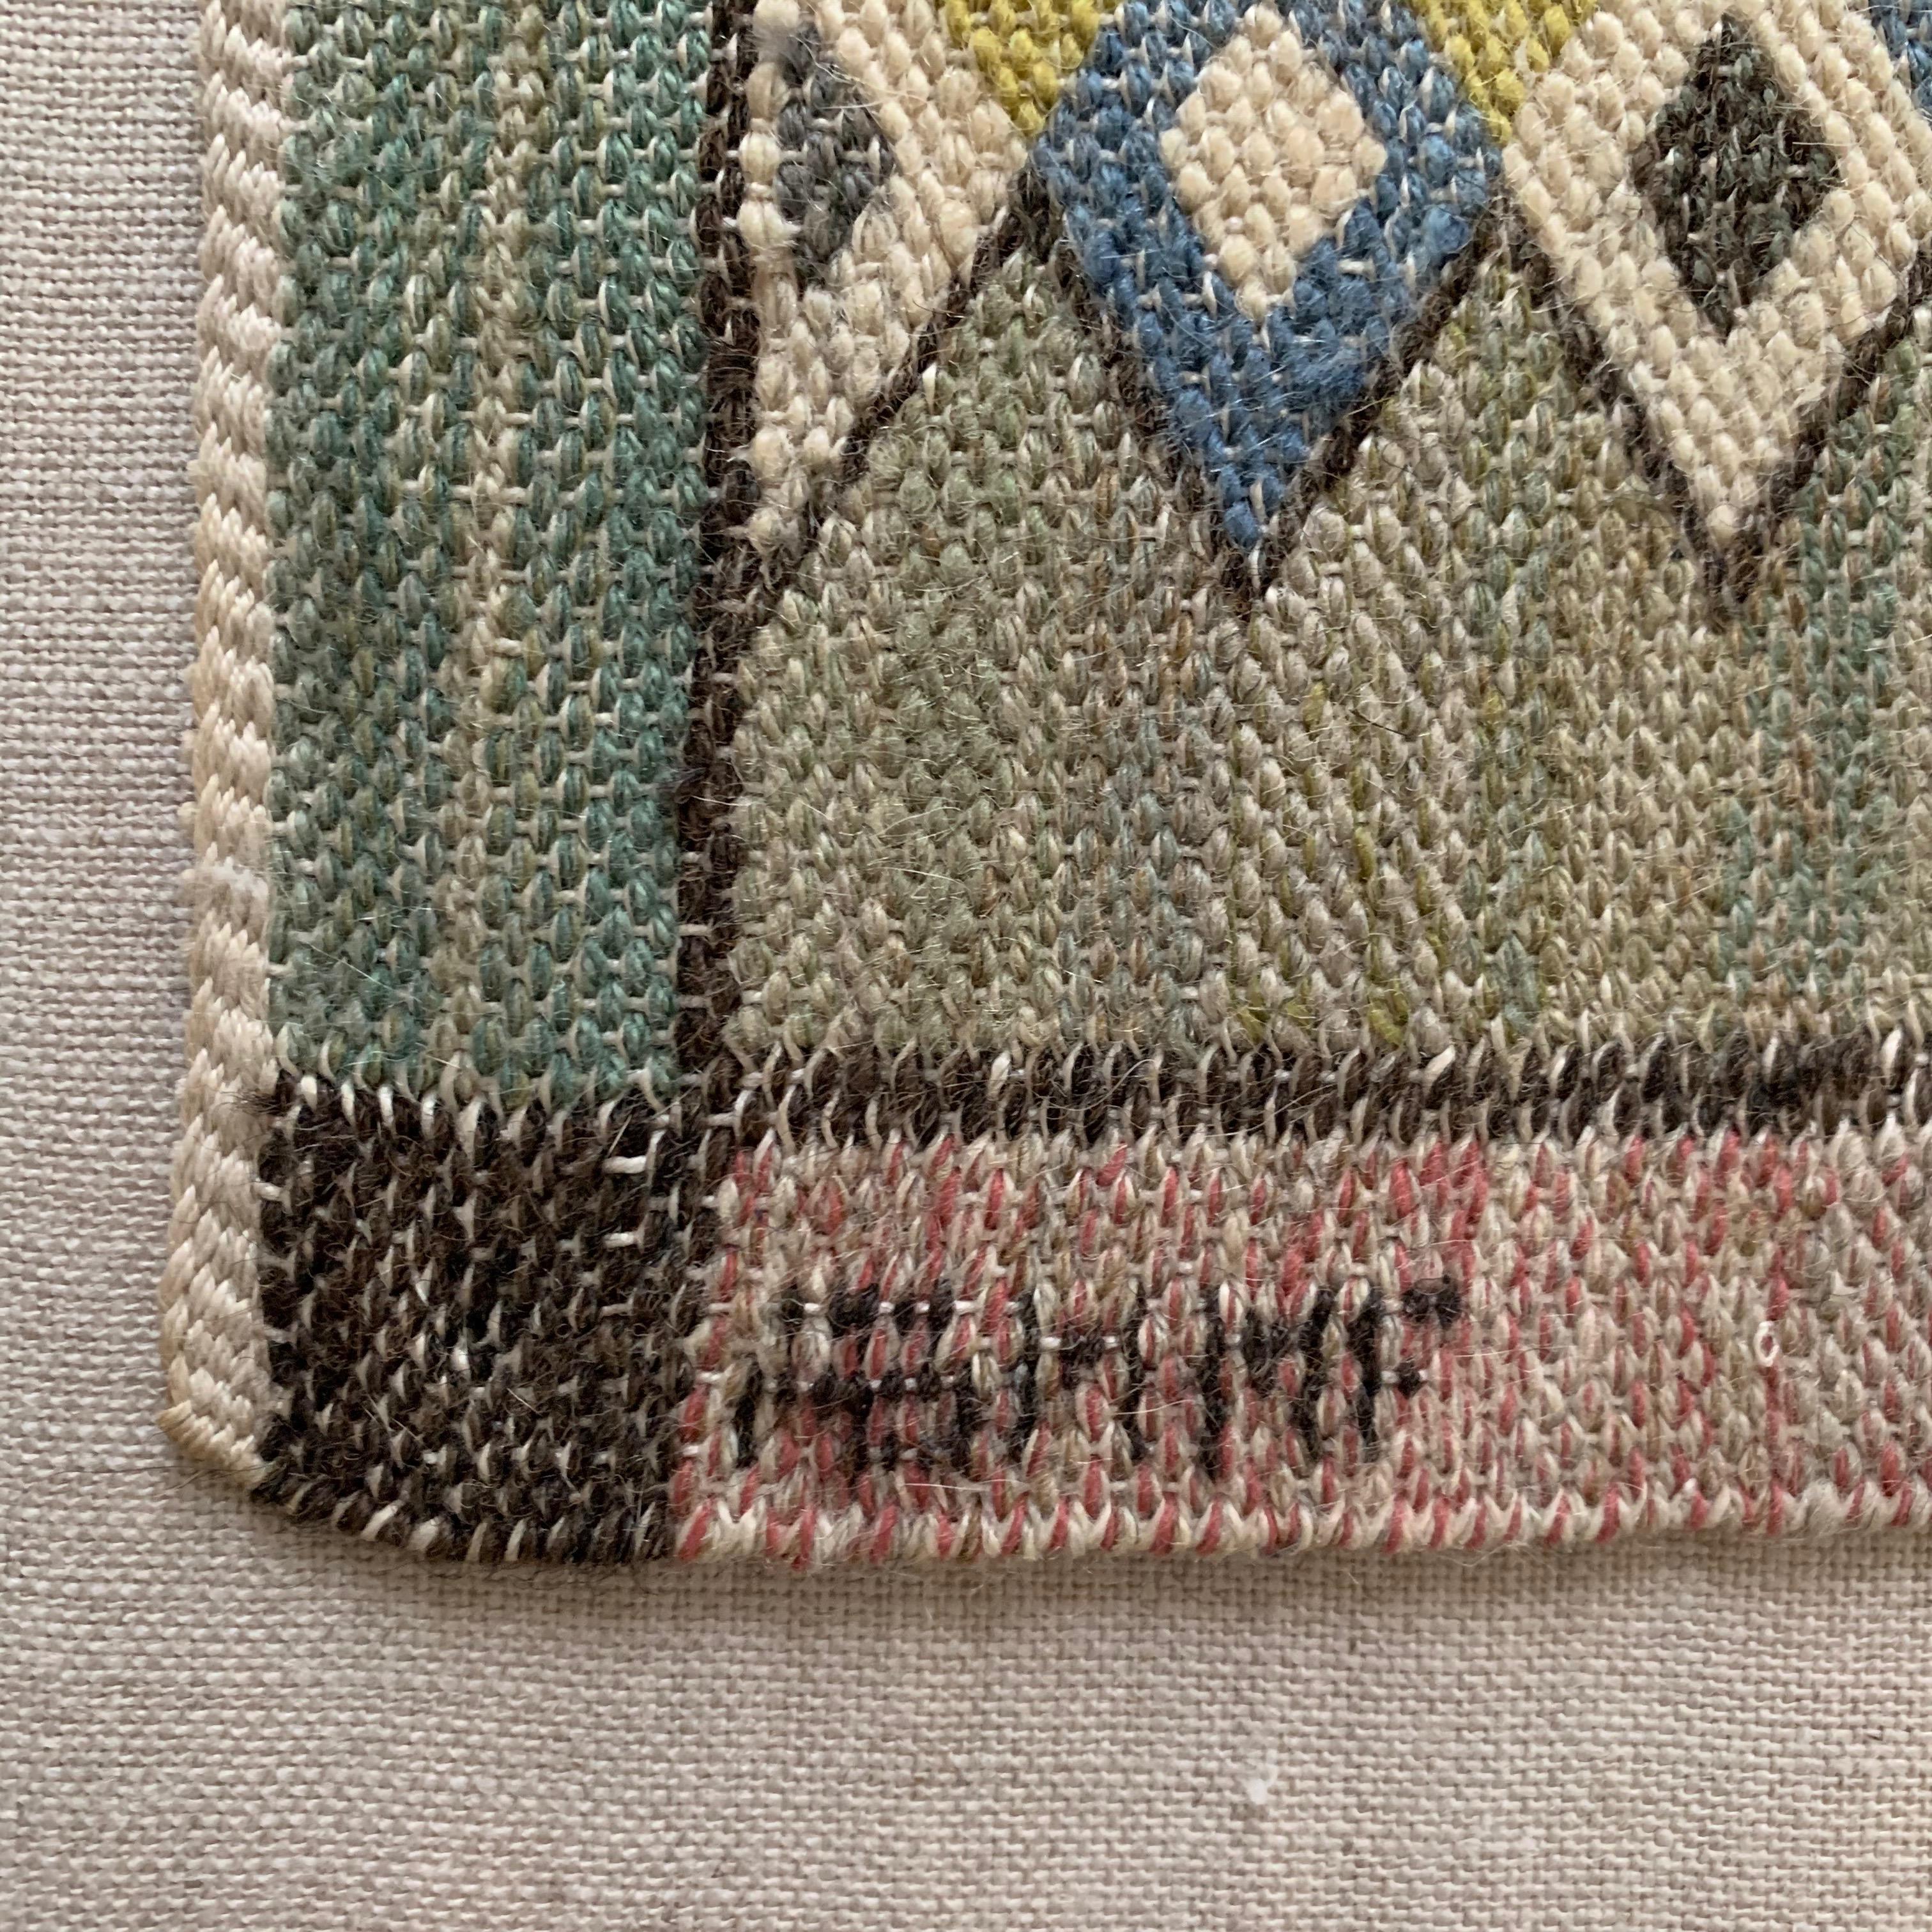 Handwoven wool tapestry mounted on linen

Designed by Barbro Nilsson for Mårta Måå-Fjetterström in 1925 and produced after 1941 

Signed by AB MMF

Designed and made in Båstad, Sweden.